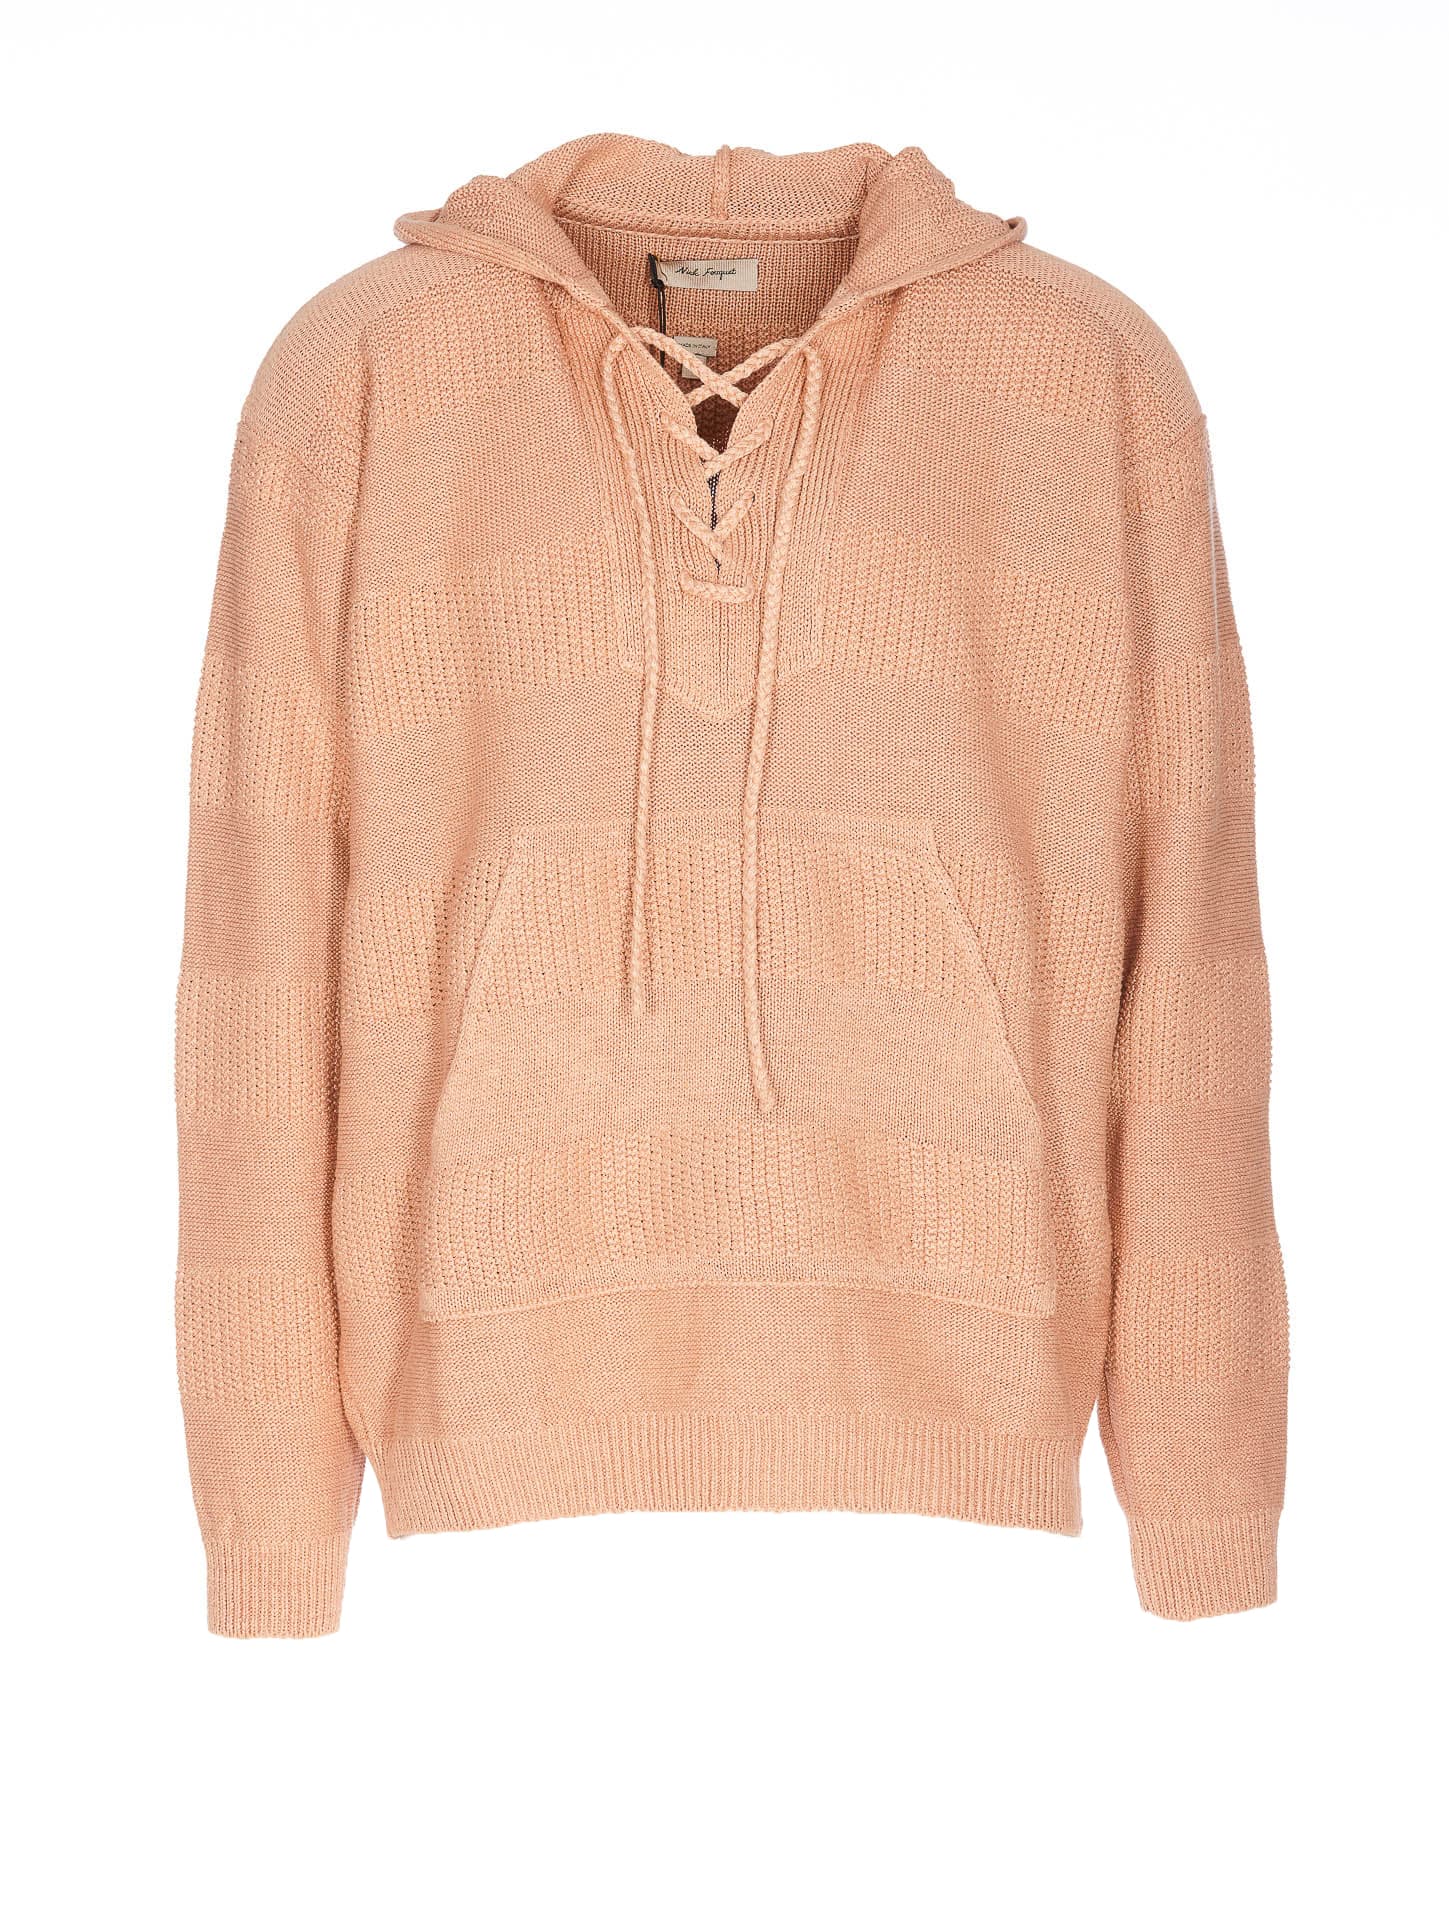 NICK FOUQUET HOODED SWEATER